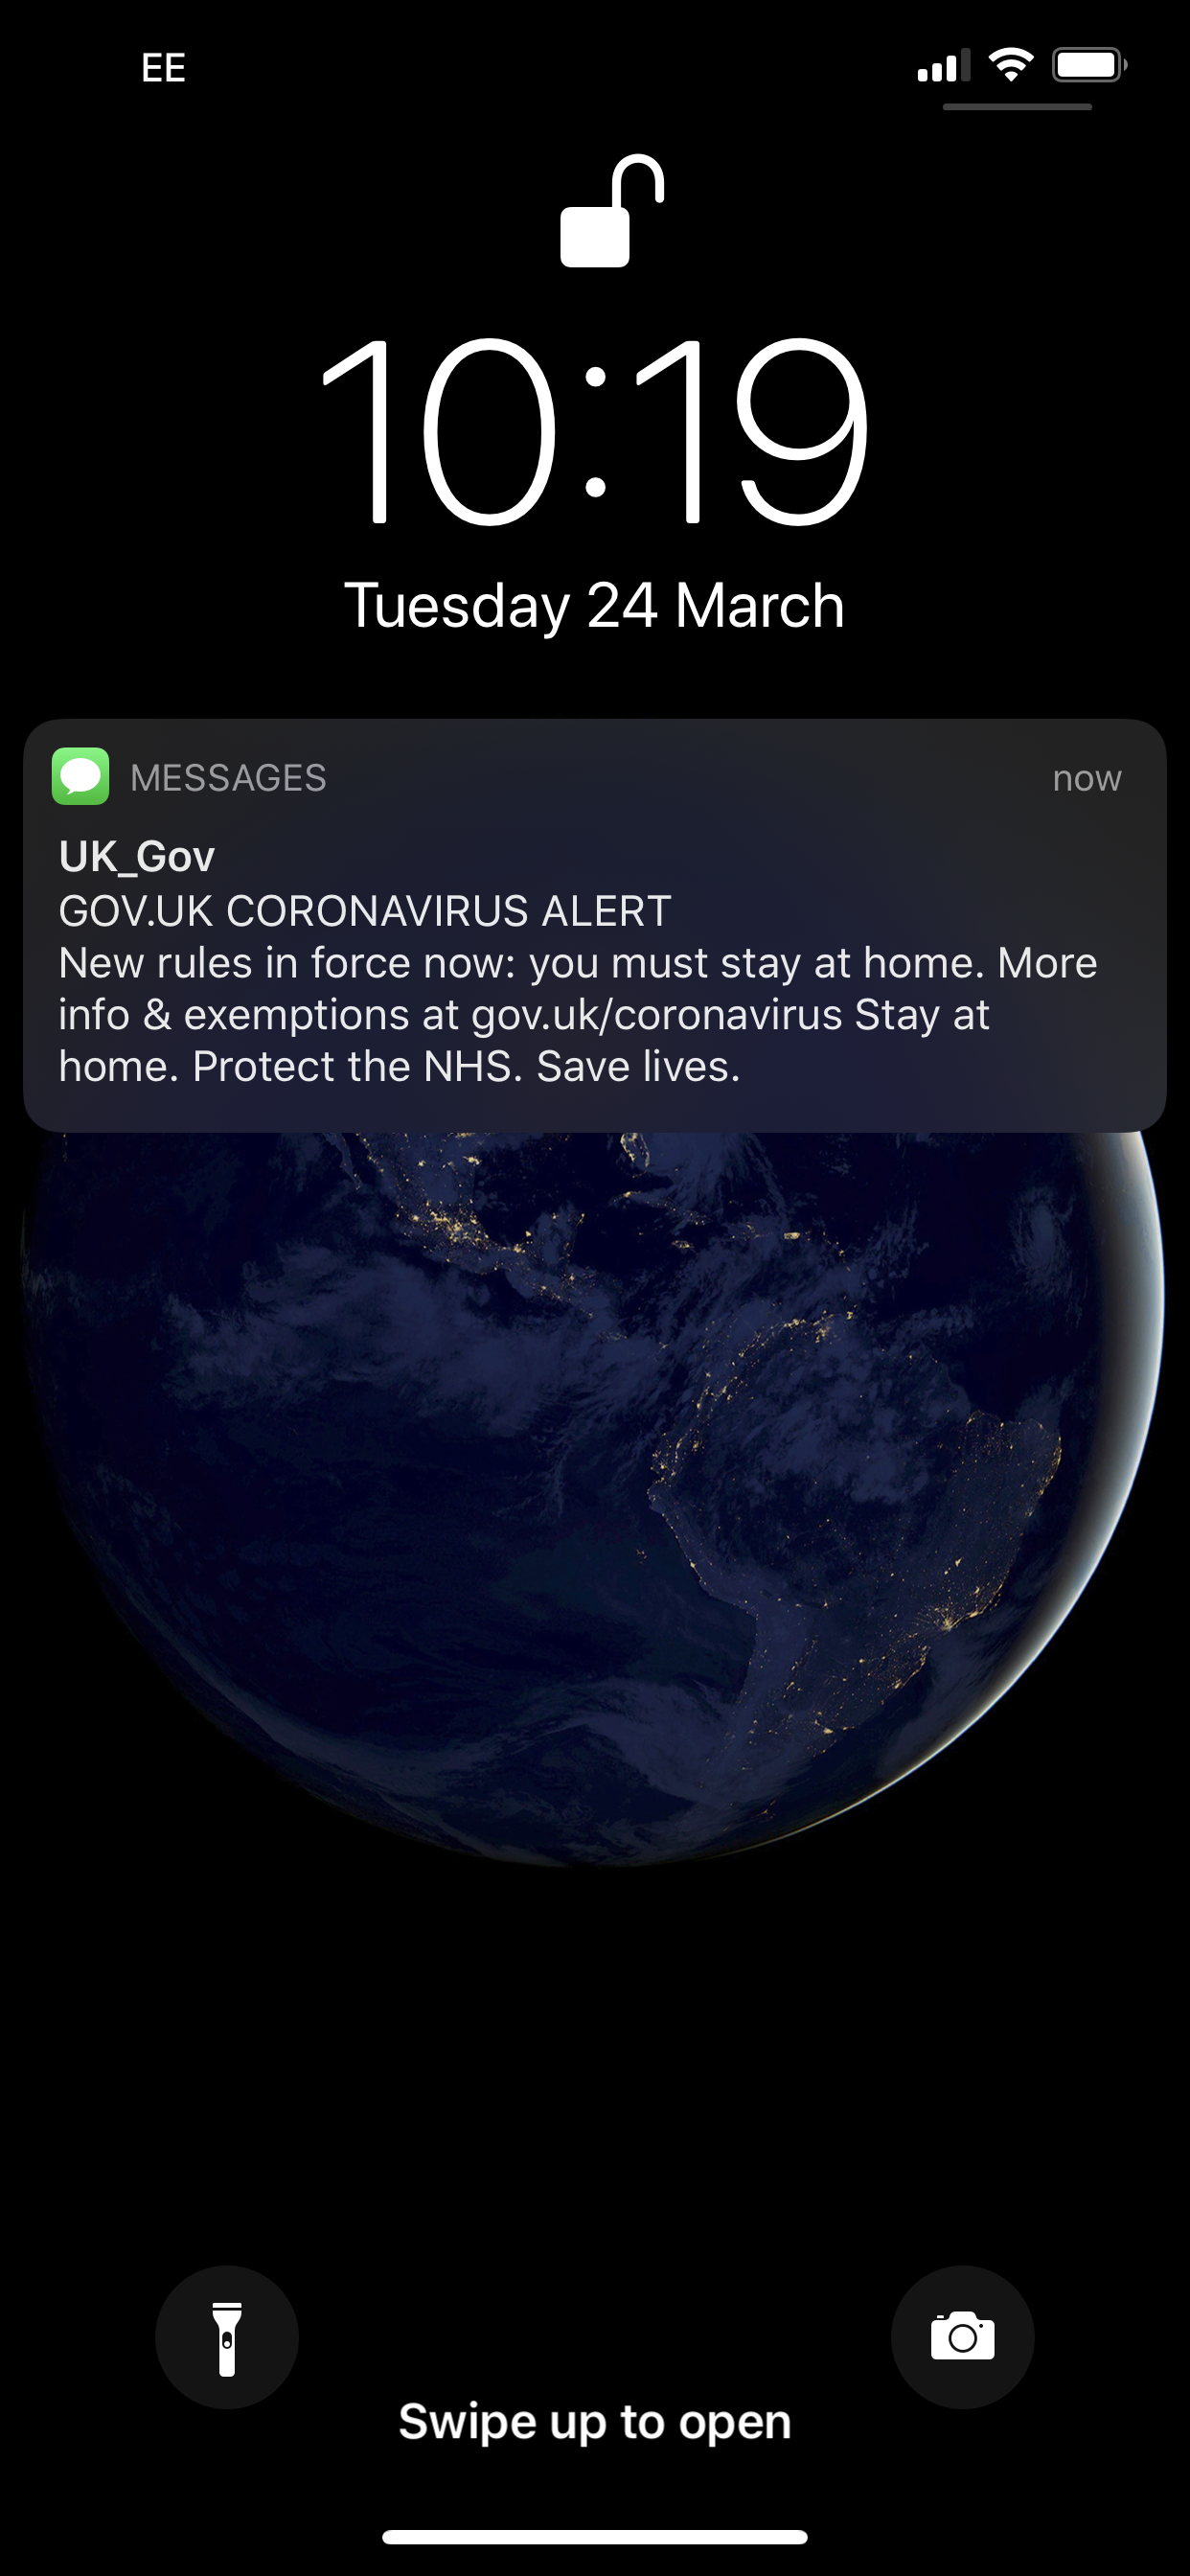 A government text message telling people to stay at home as part of new UK lockdown rules to combat the spread of Covid-19 